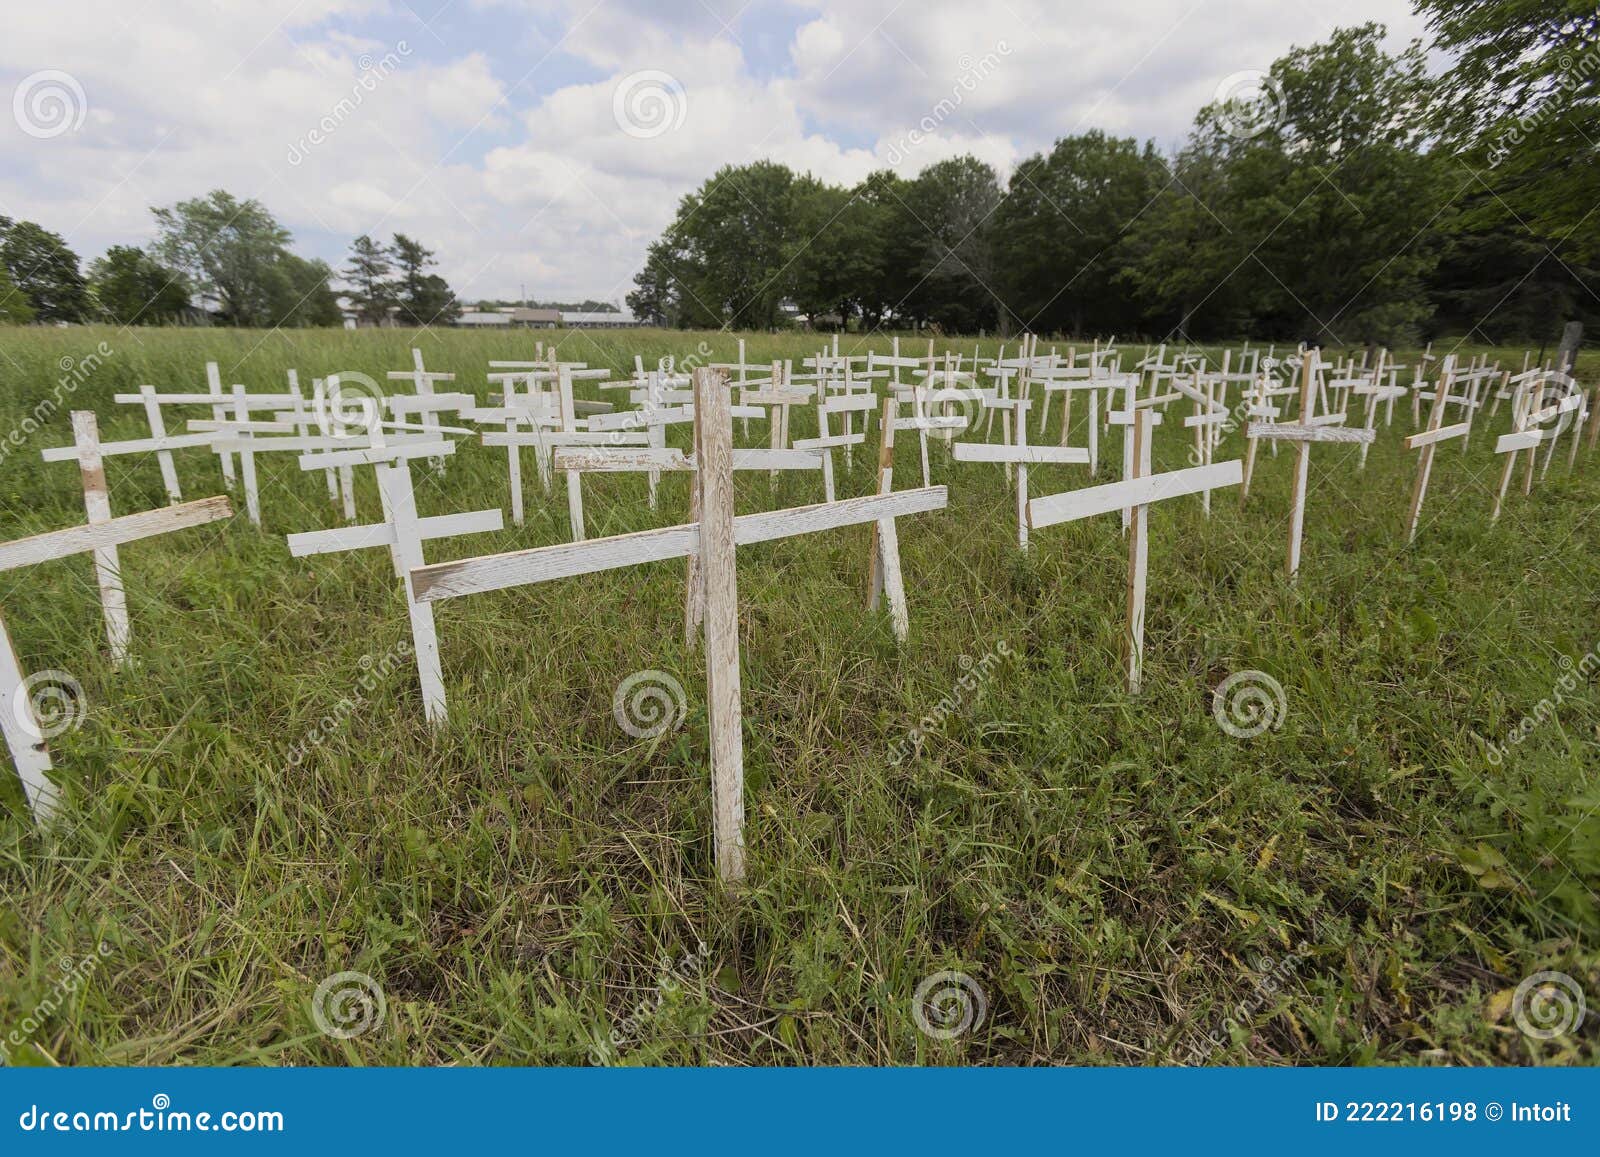 a small impromptu memorial of white crosses to grieve the loss of hundreds of indigenous children